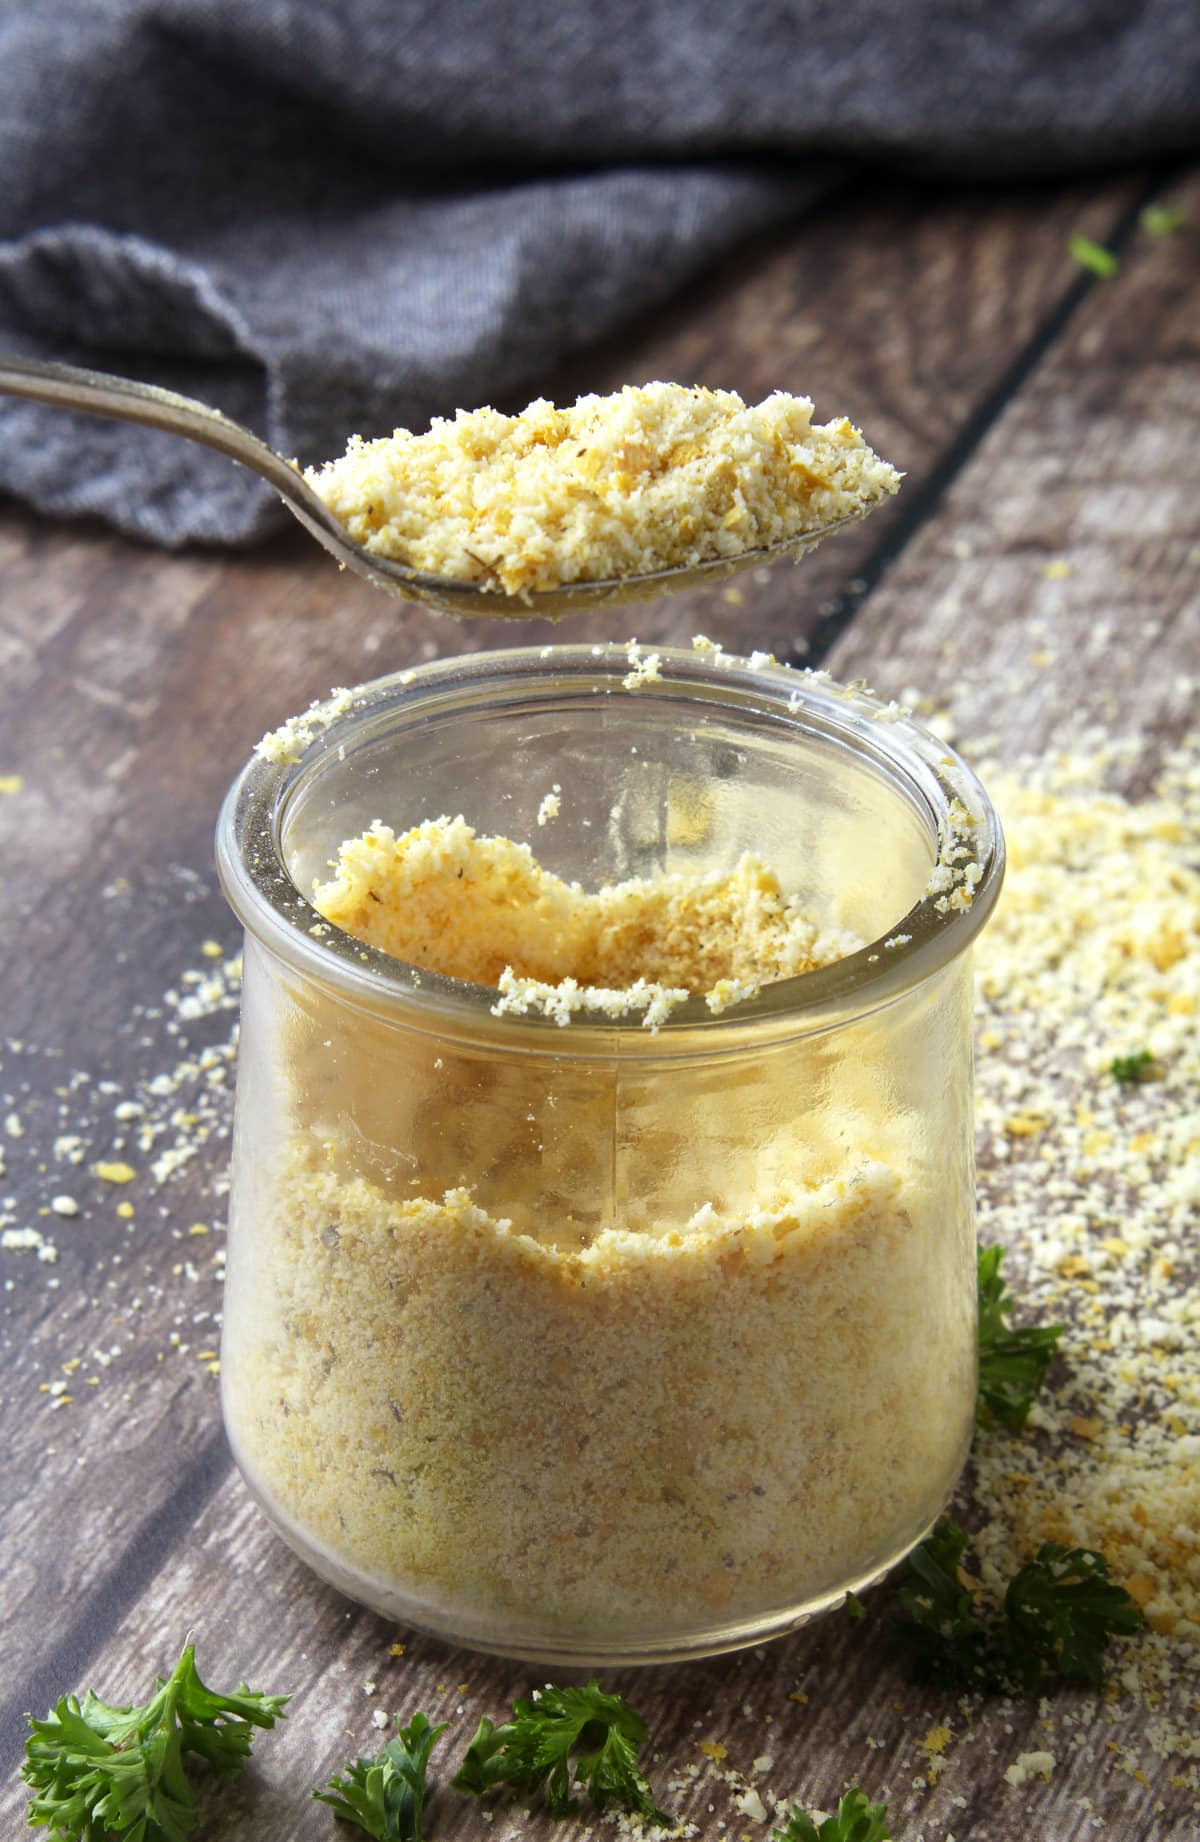 It's VEGAN PARMESAN CHEESE!!!! Now you can feel like a kid again with ENDLESS AMOUNTS of Parmesan on your noodles and All The Things! Takes 5 min. #veganparmesancheese #veganparmesancheeserecipe #vegancondiments #easyveganrecipes #vegancheeserecipe #vegancheese #bohemianvegankitchen